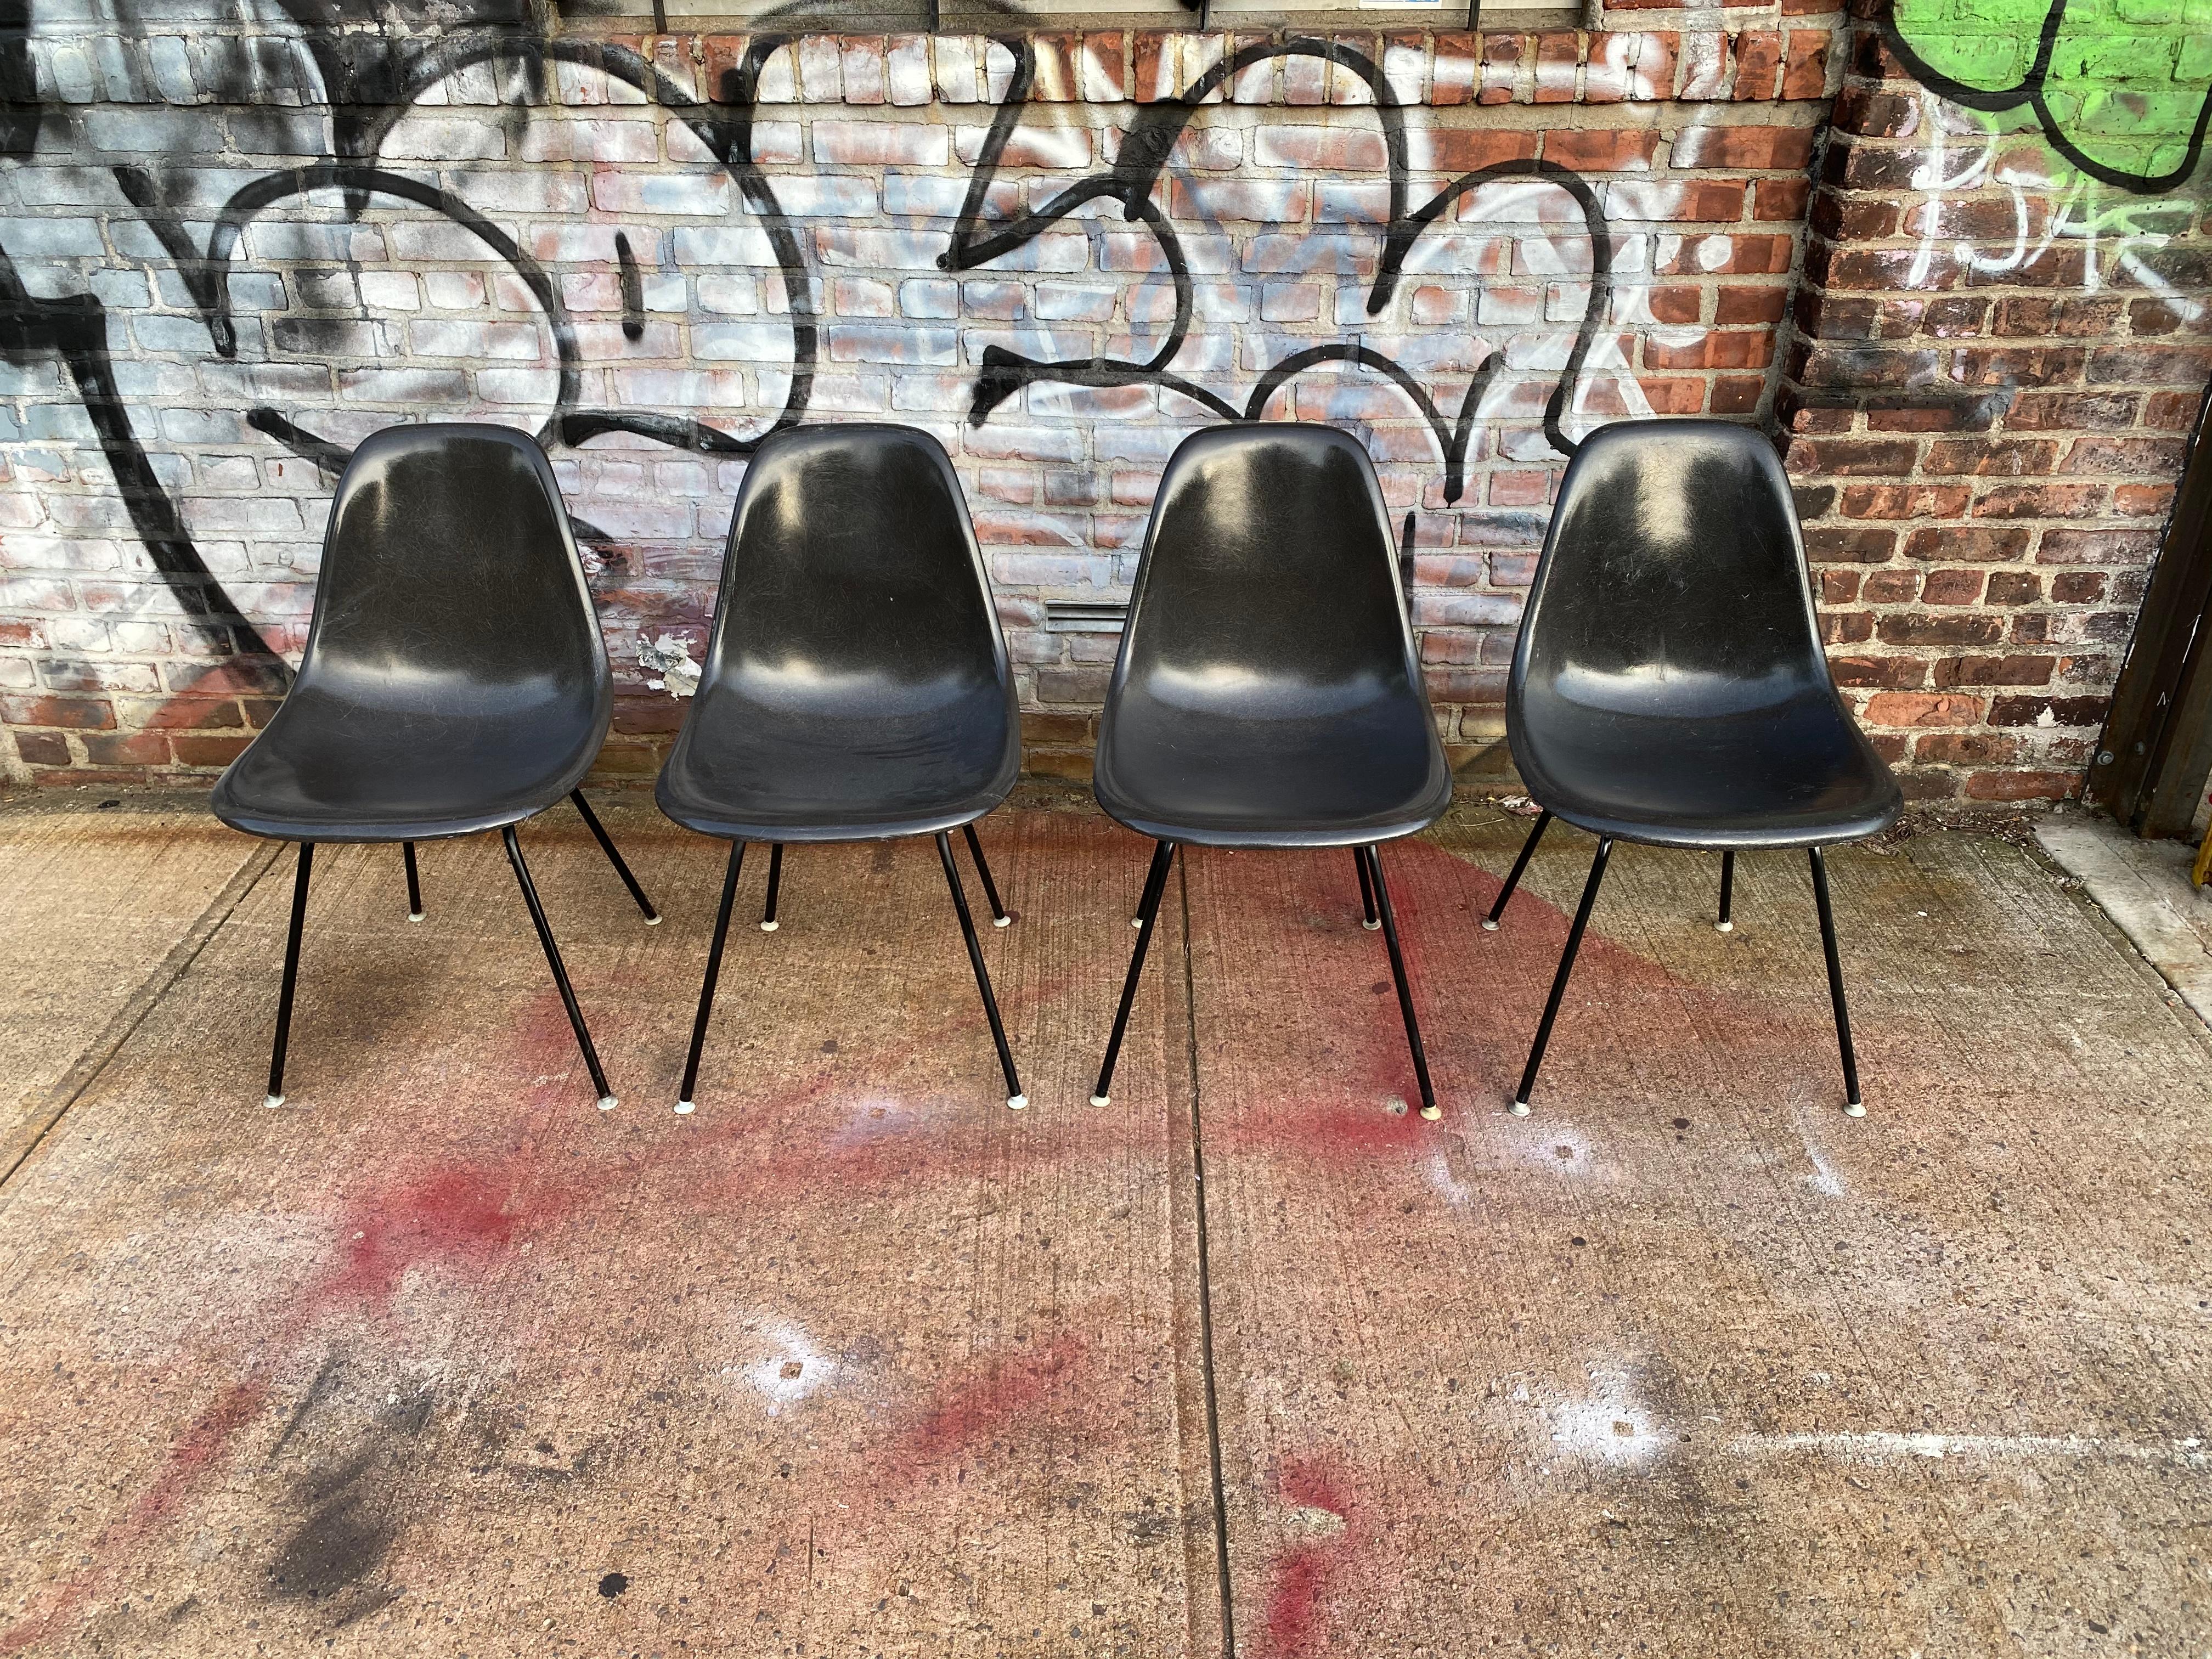 The sexiest set of Eames chairs in town. All black on black color combination. All self leveling glides present on black bases. No cracks in shells. All signed Herman Miller and guaranteed authentic. In very good condition.